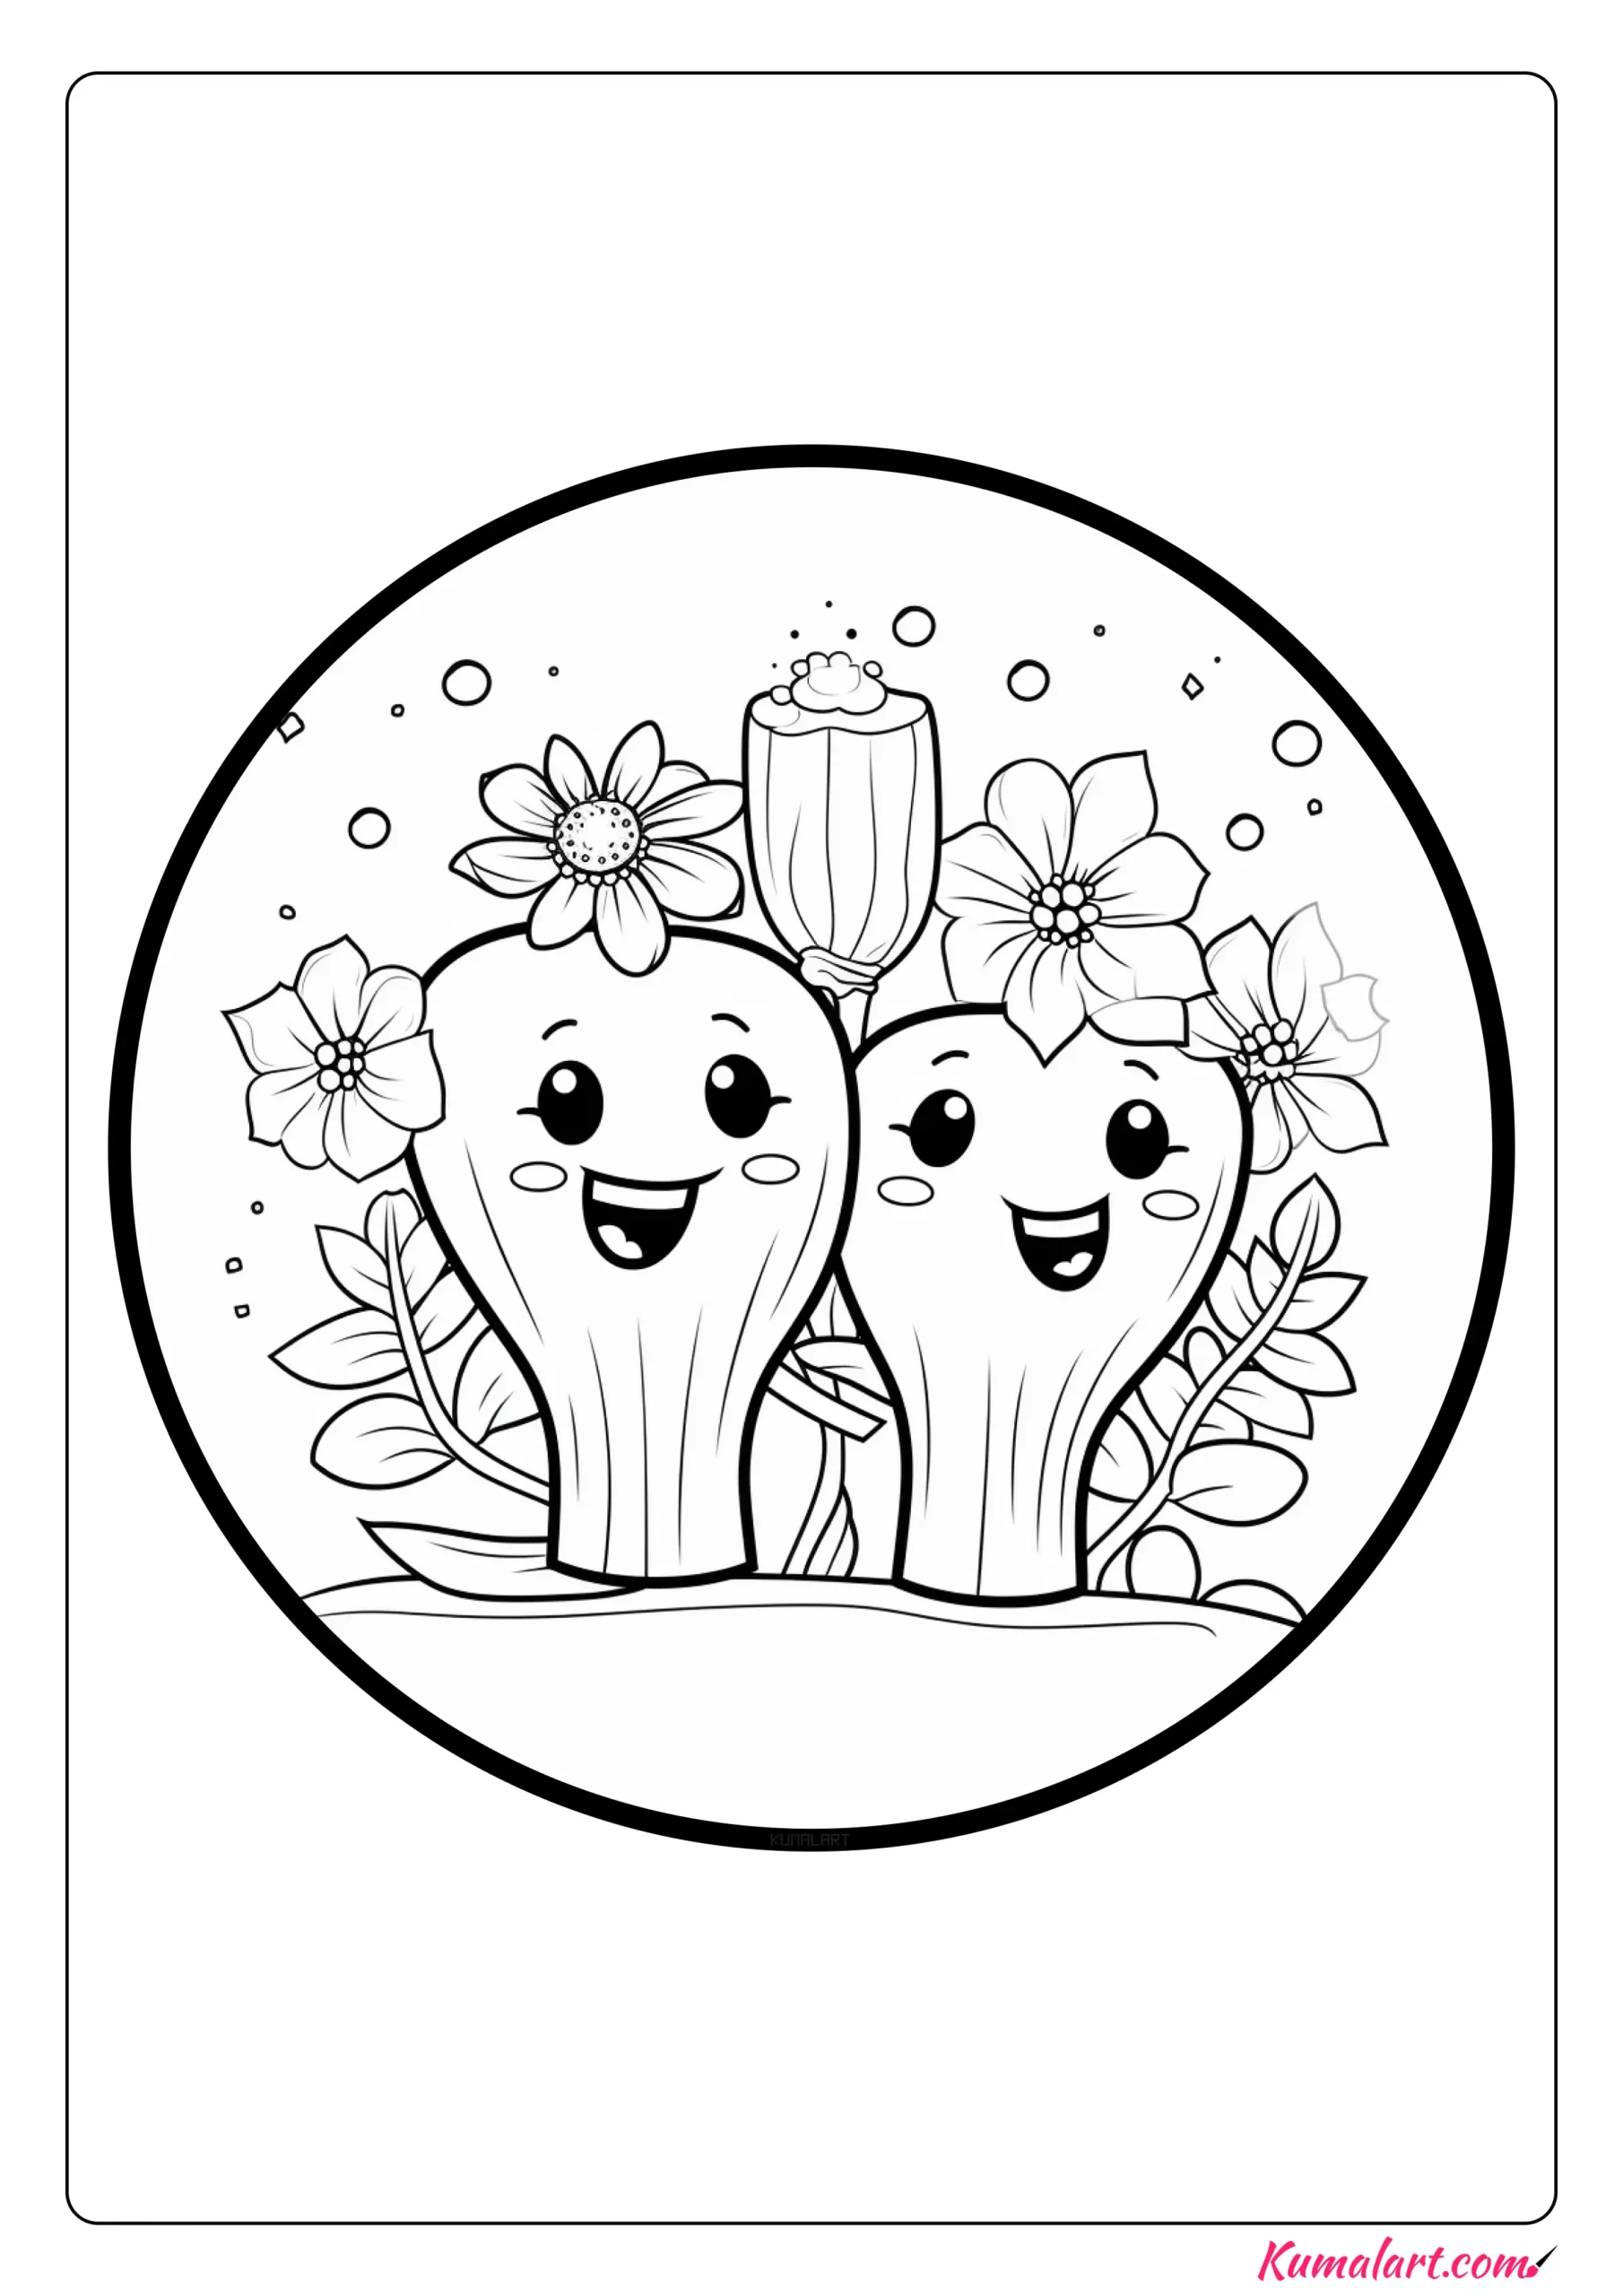 Adorable Tooth Brushing Coloring Page